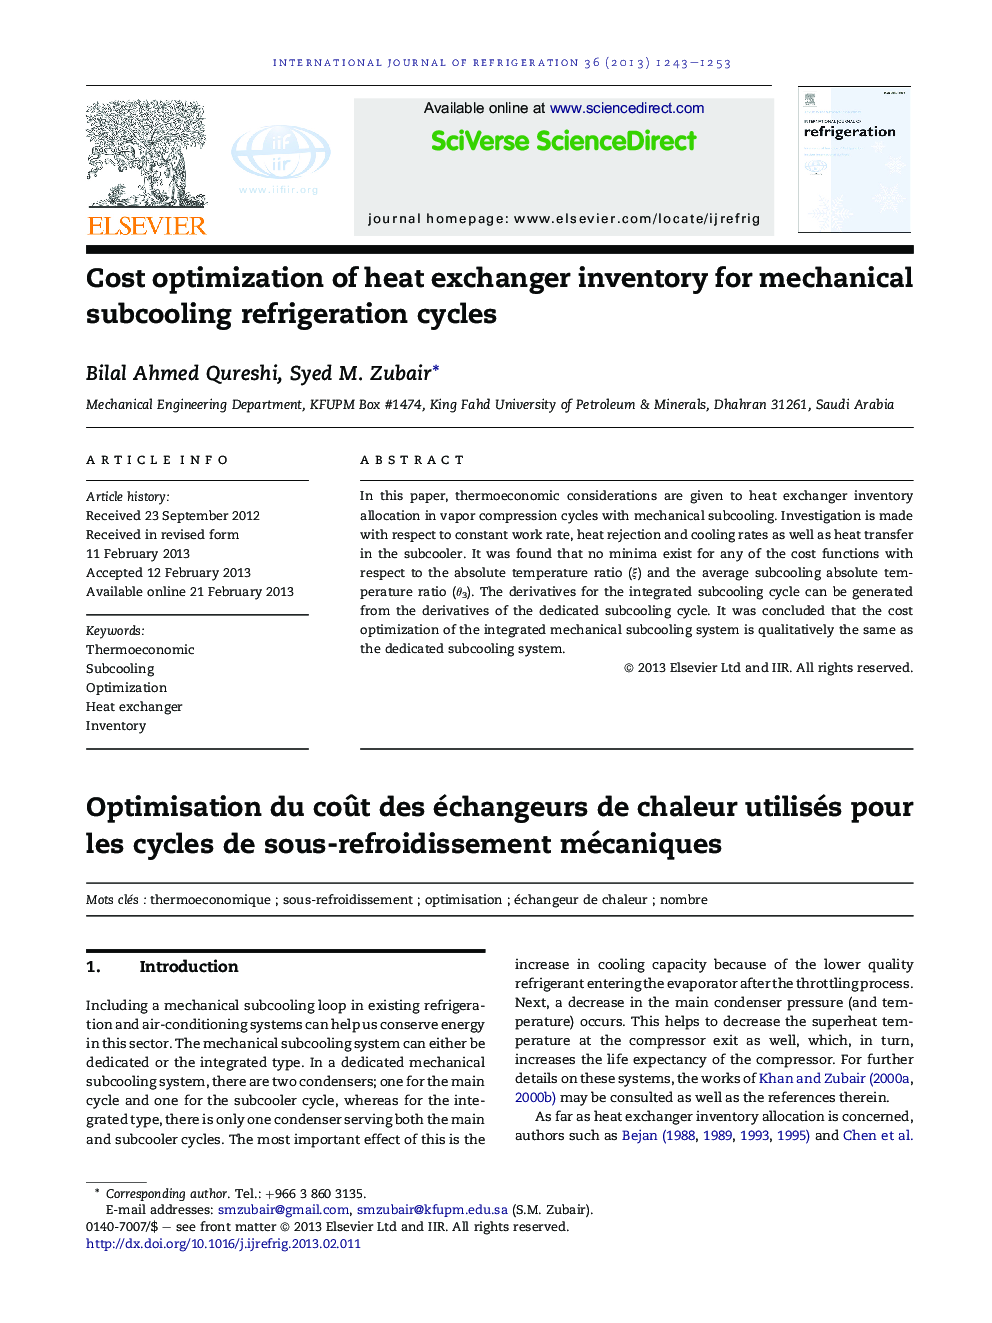 Cost optimization of heat exchanger inventory for mechanical subcooling refrigeration cycles